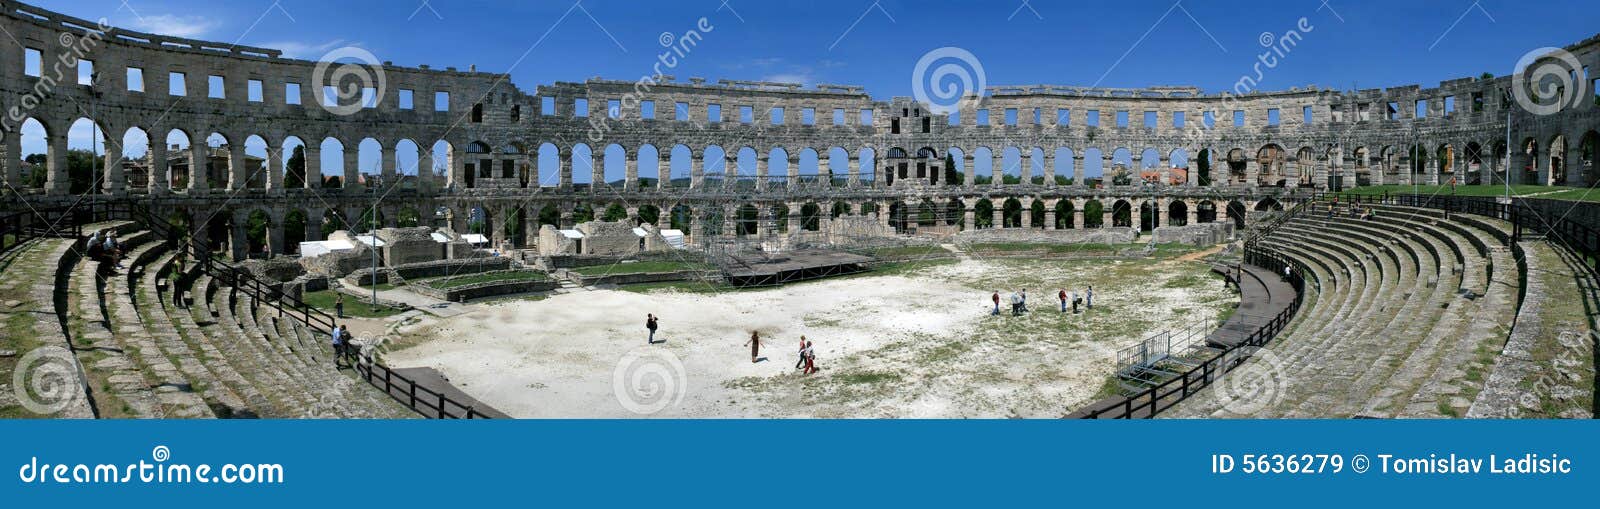 panorama of arena in pula